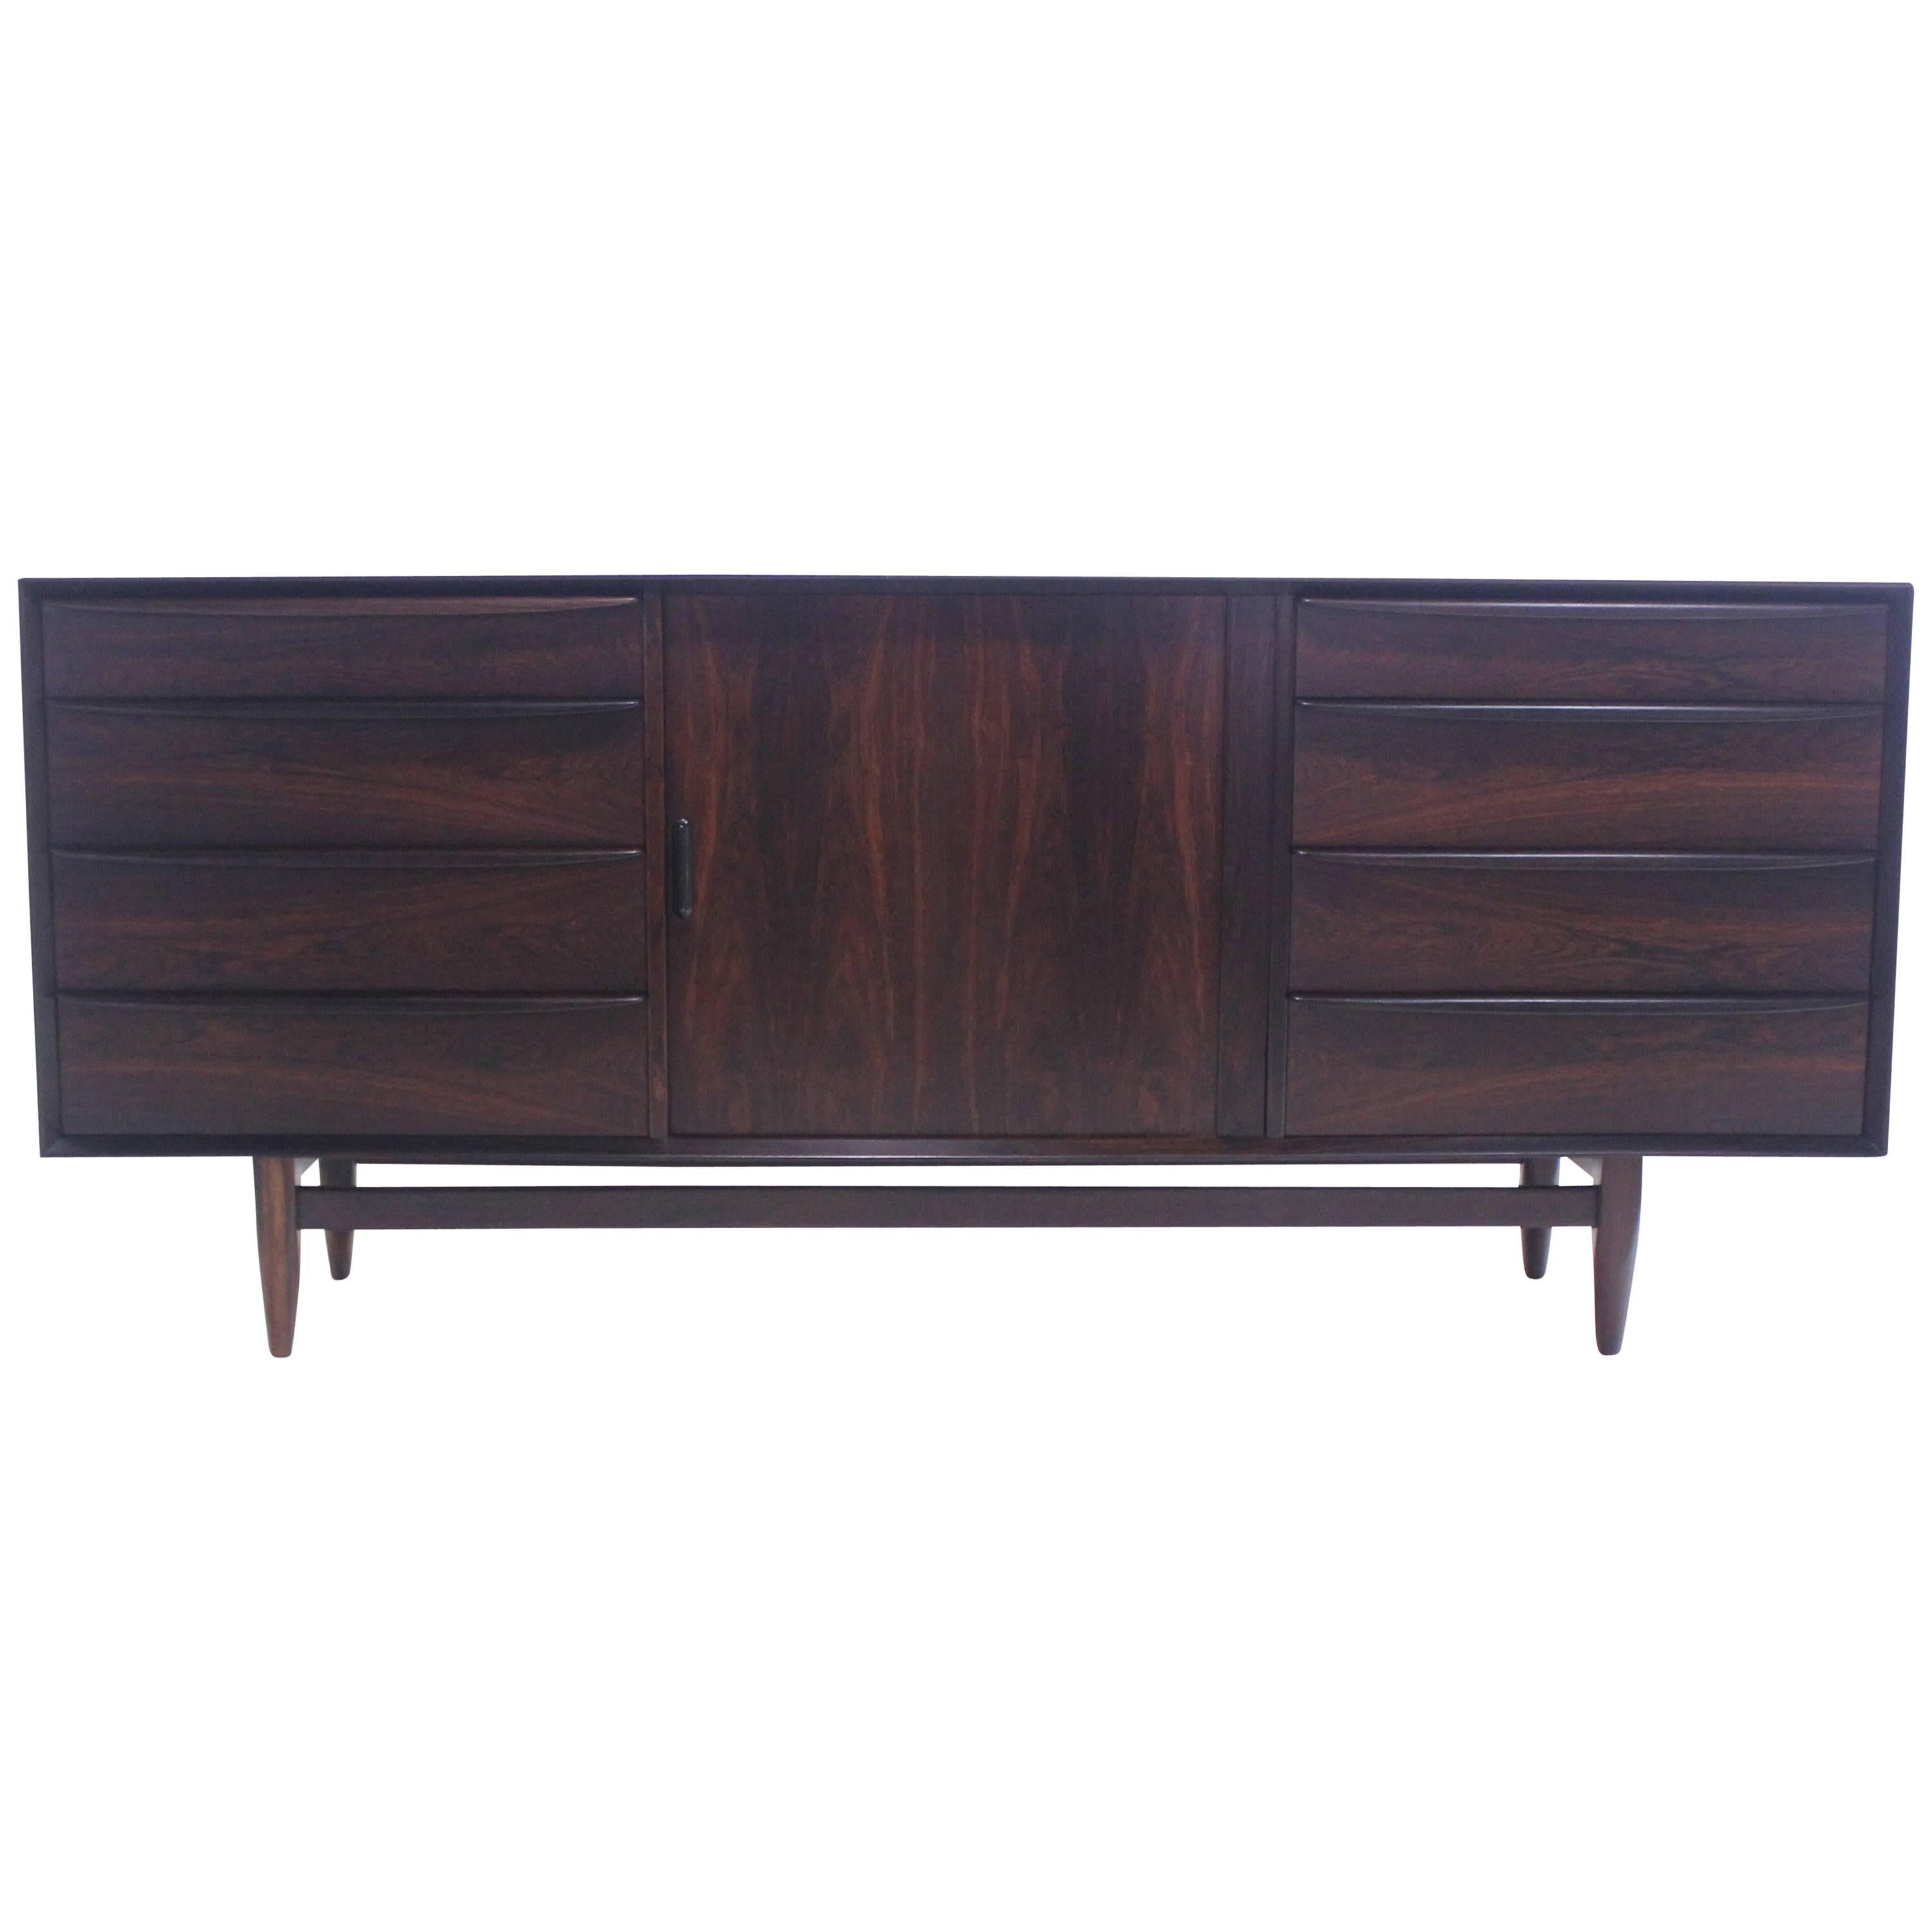 Danish Modern Rosewood Dresser or Credenza with Tambour Doors by Falster For Sale